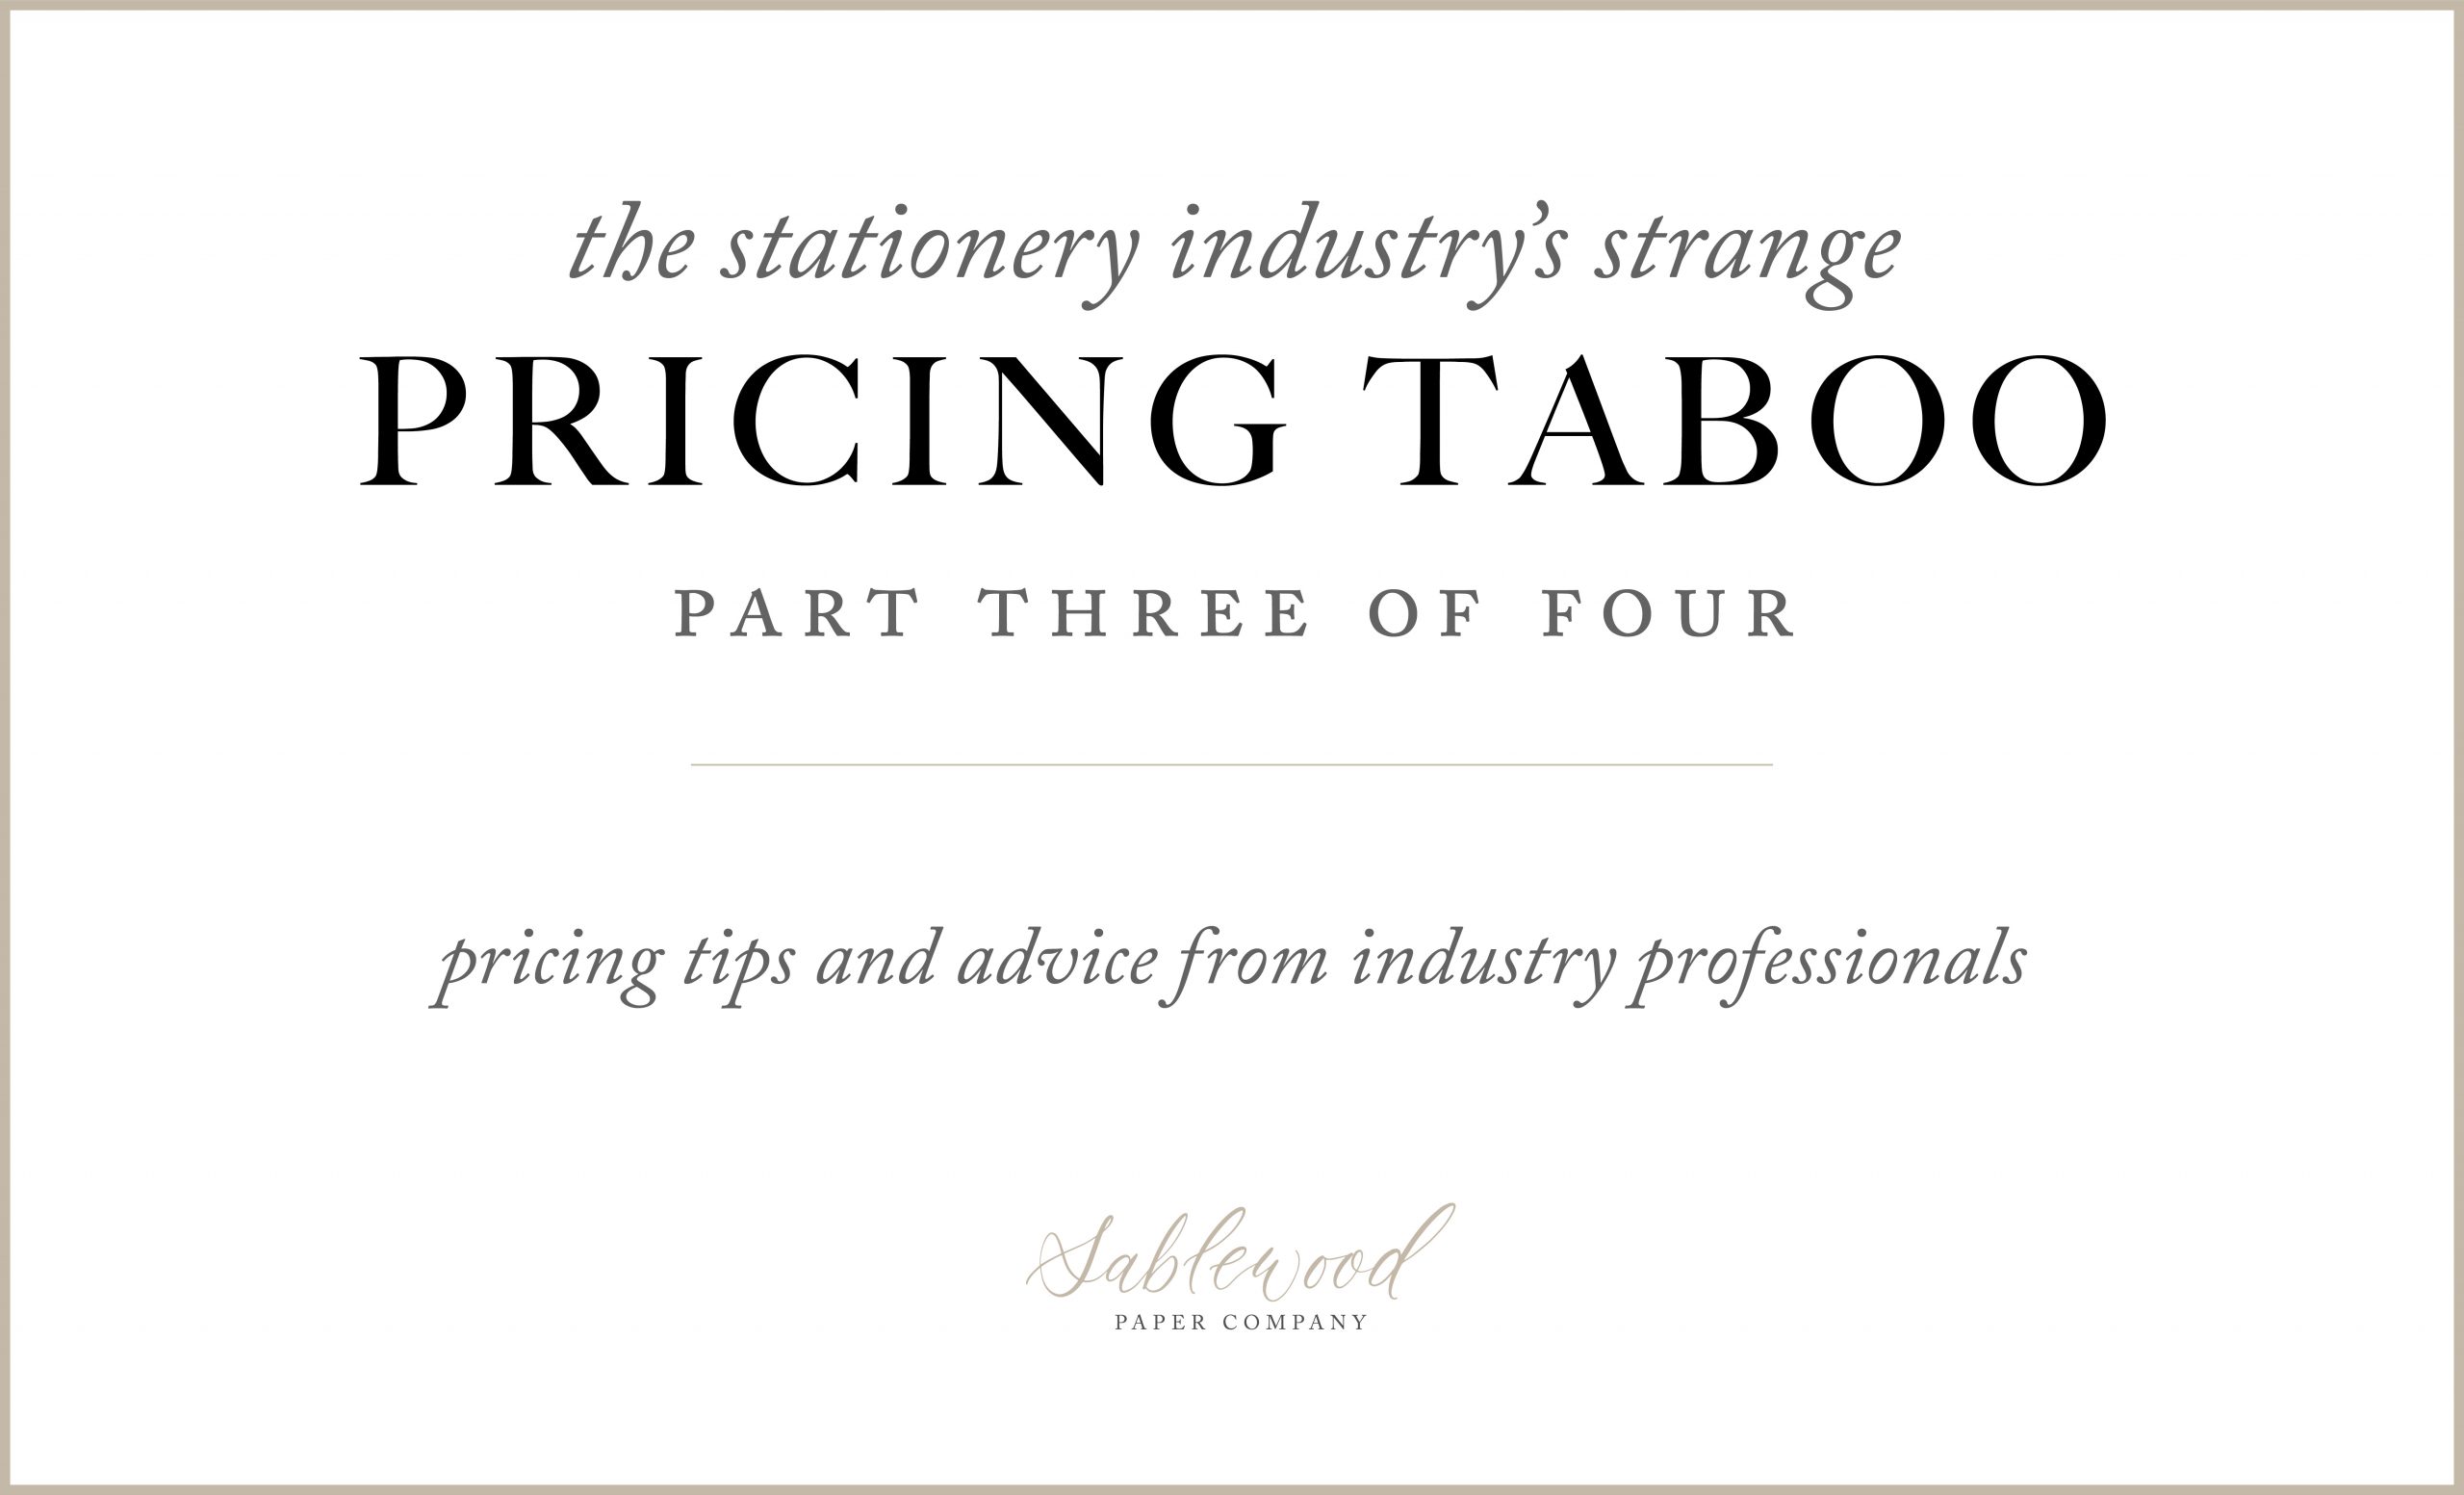 On the Blog: The Stationery Pricing Taboo Part Three